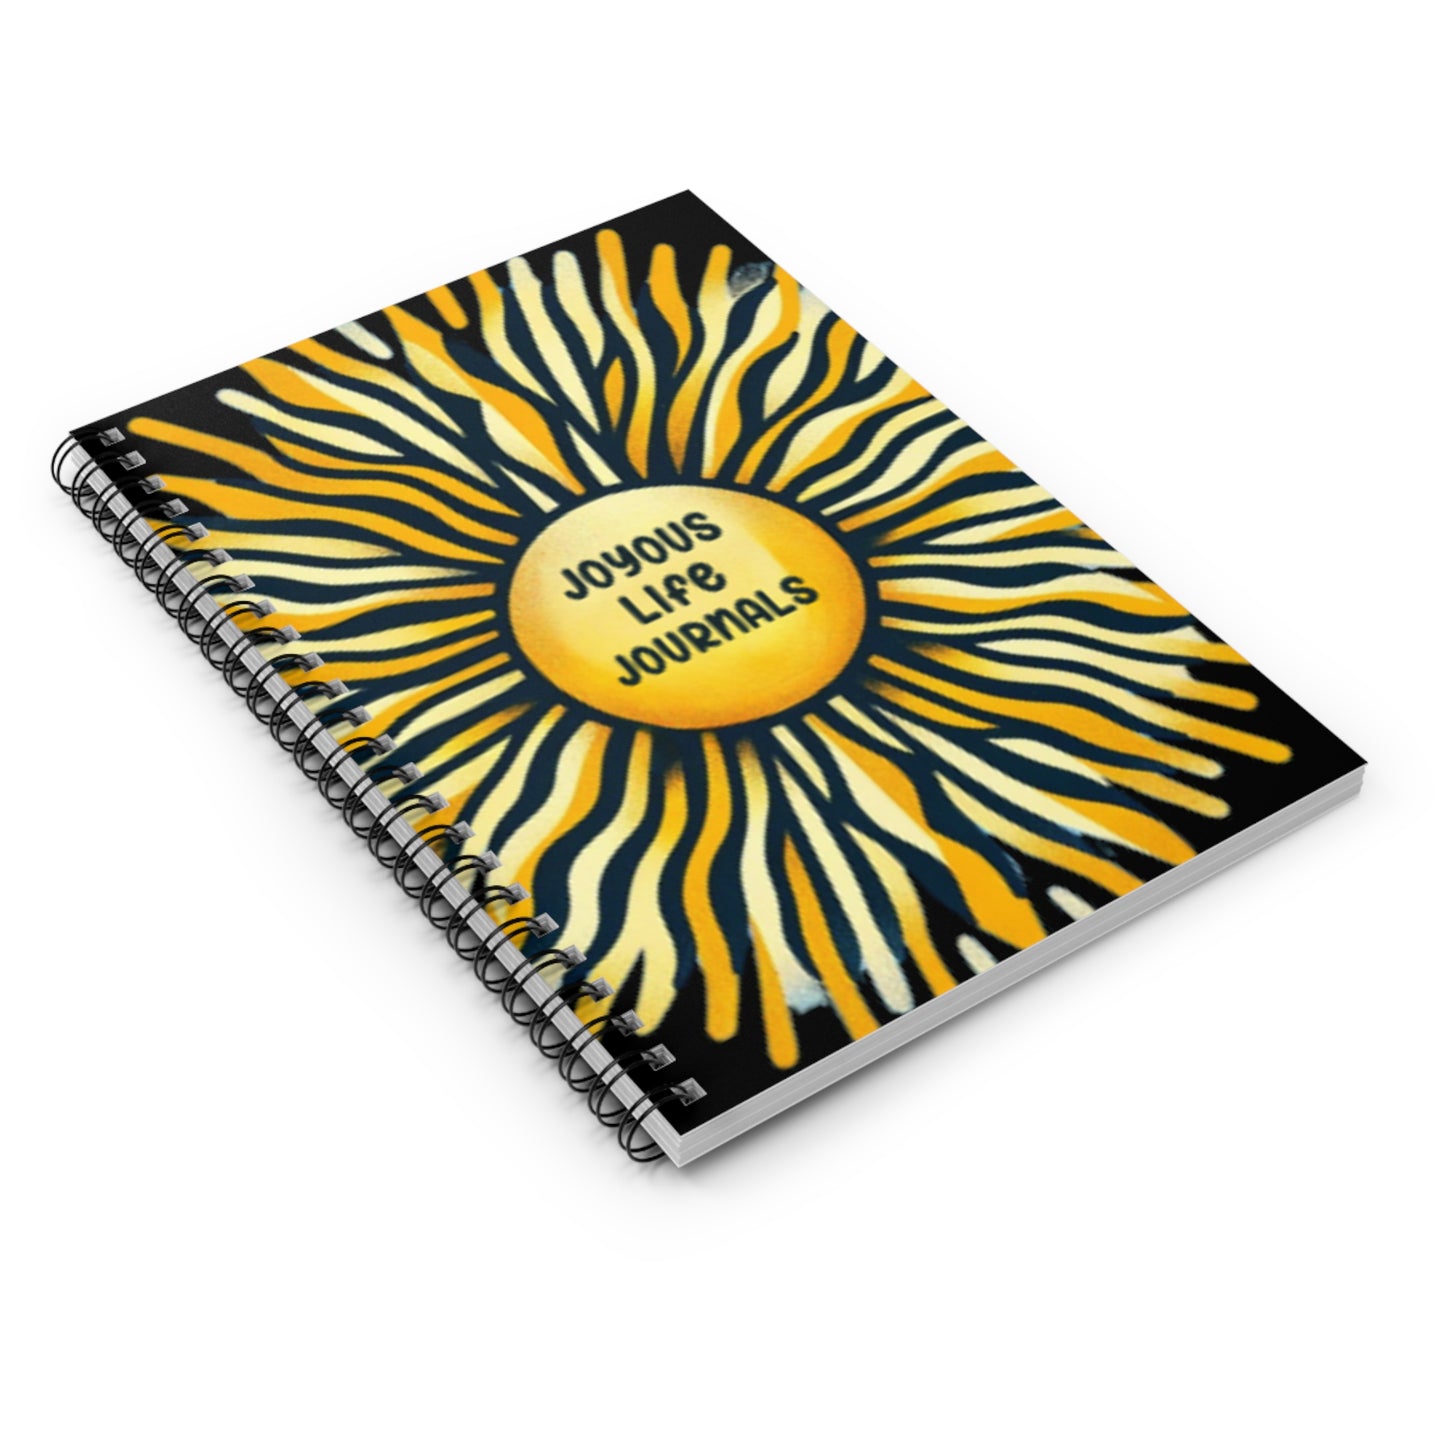 Radiant Moments Spiral Notebook - Ruled Line, Joyous Life Journals